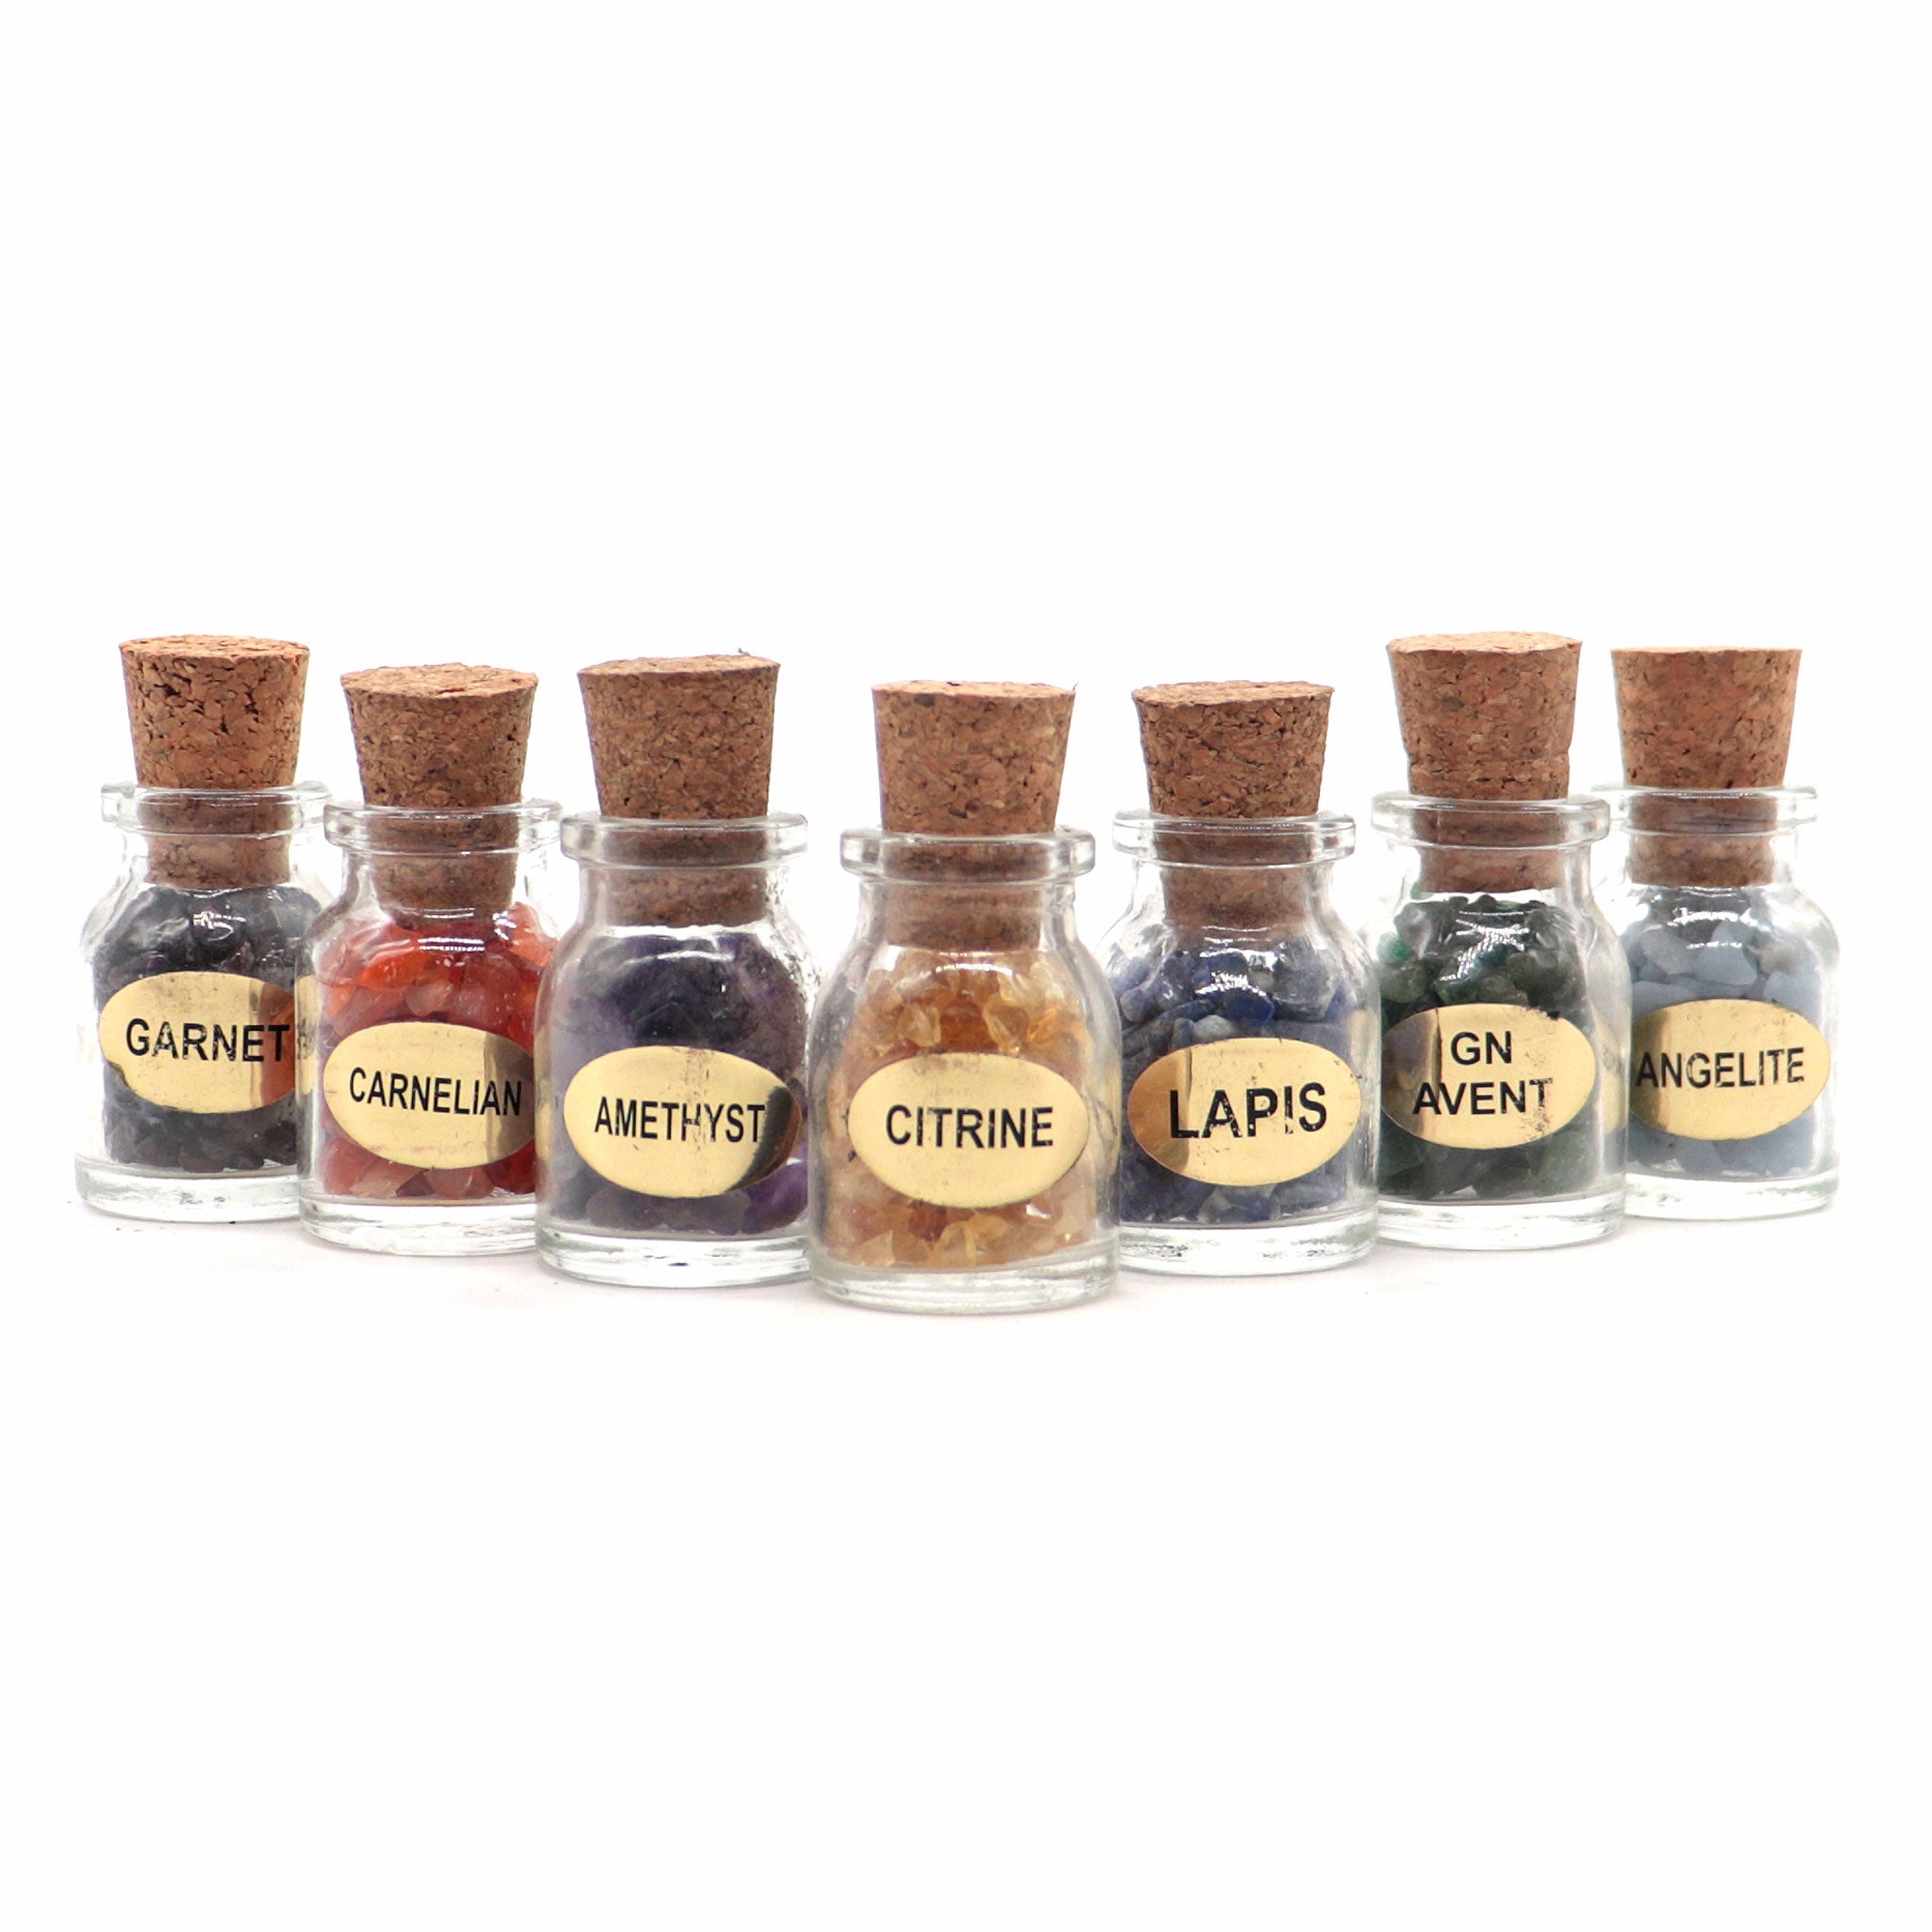 Chakra Chips in Bottle 7 Piece Boxed Set - 13 Moons